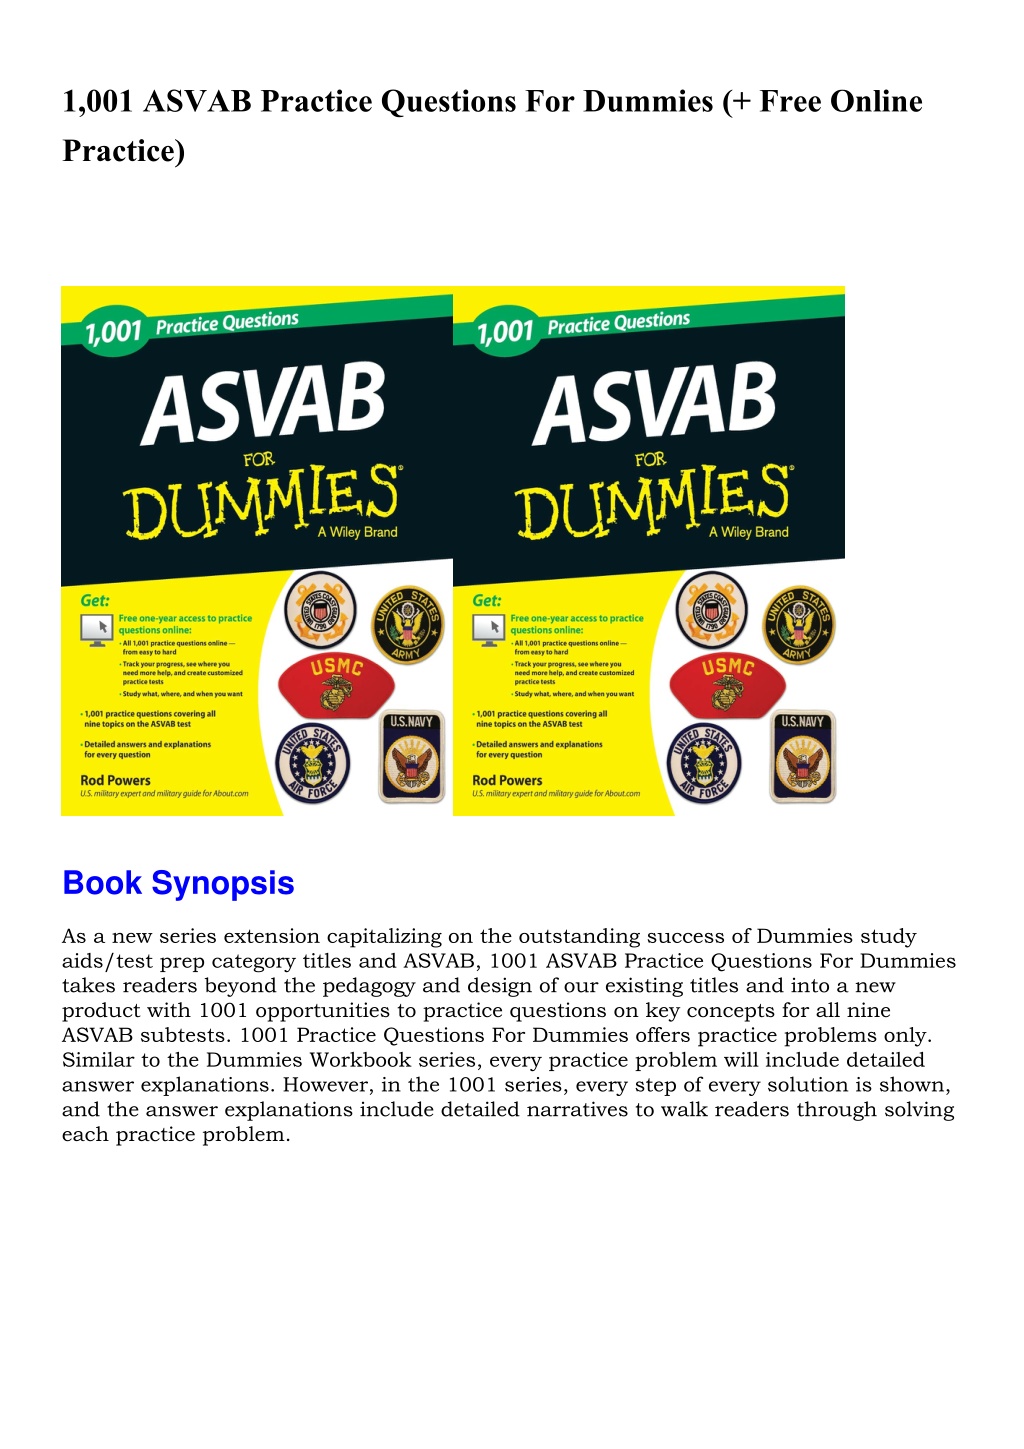 PPT DOWNLOAD 1 001 ASVAB Practice Questions For Dummies Free Online